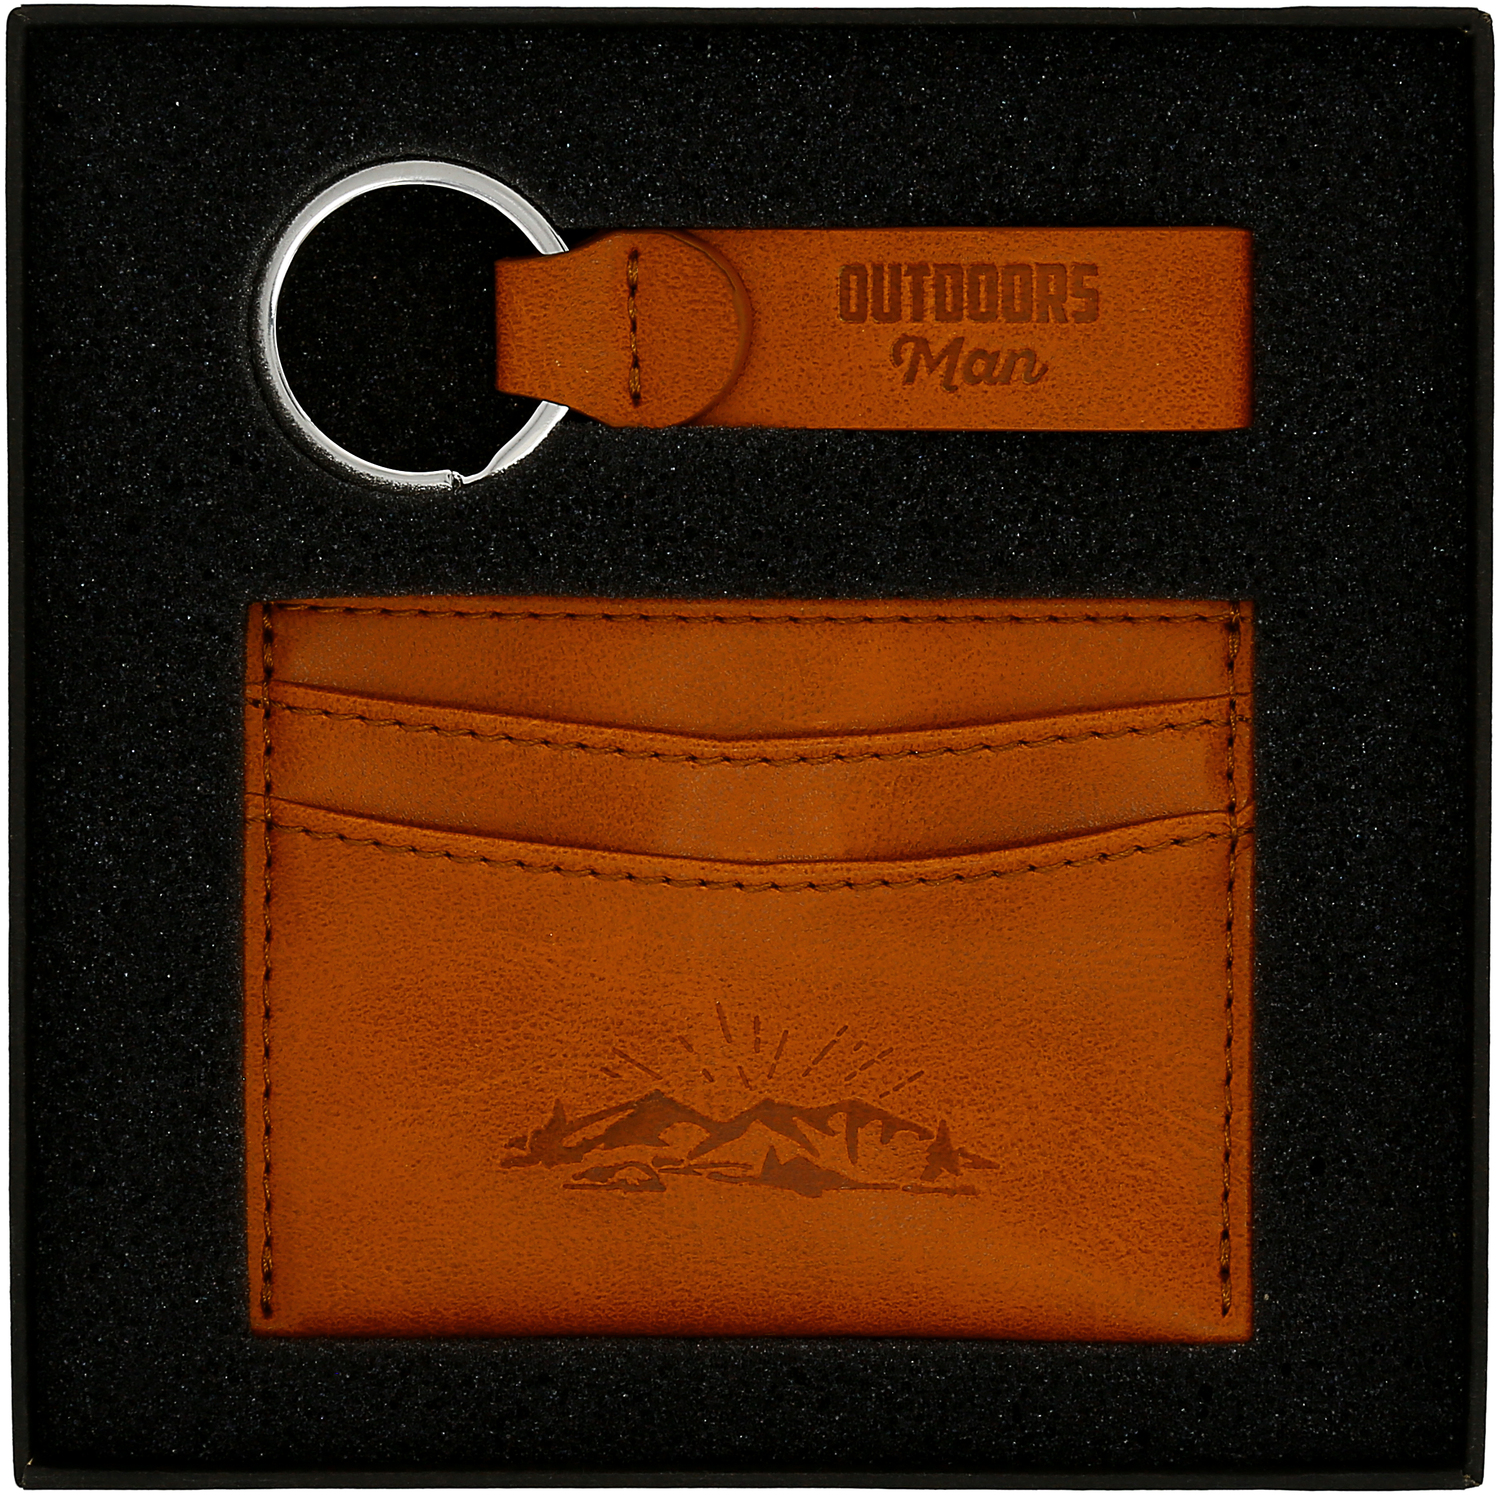 Outdoors Man by Man Out - Outdoors Man - PU Leather Keyring & Wallet Set